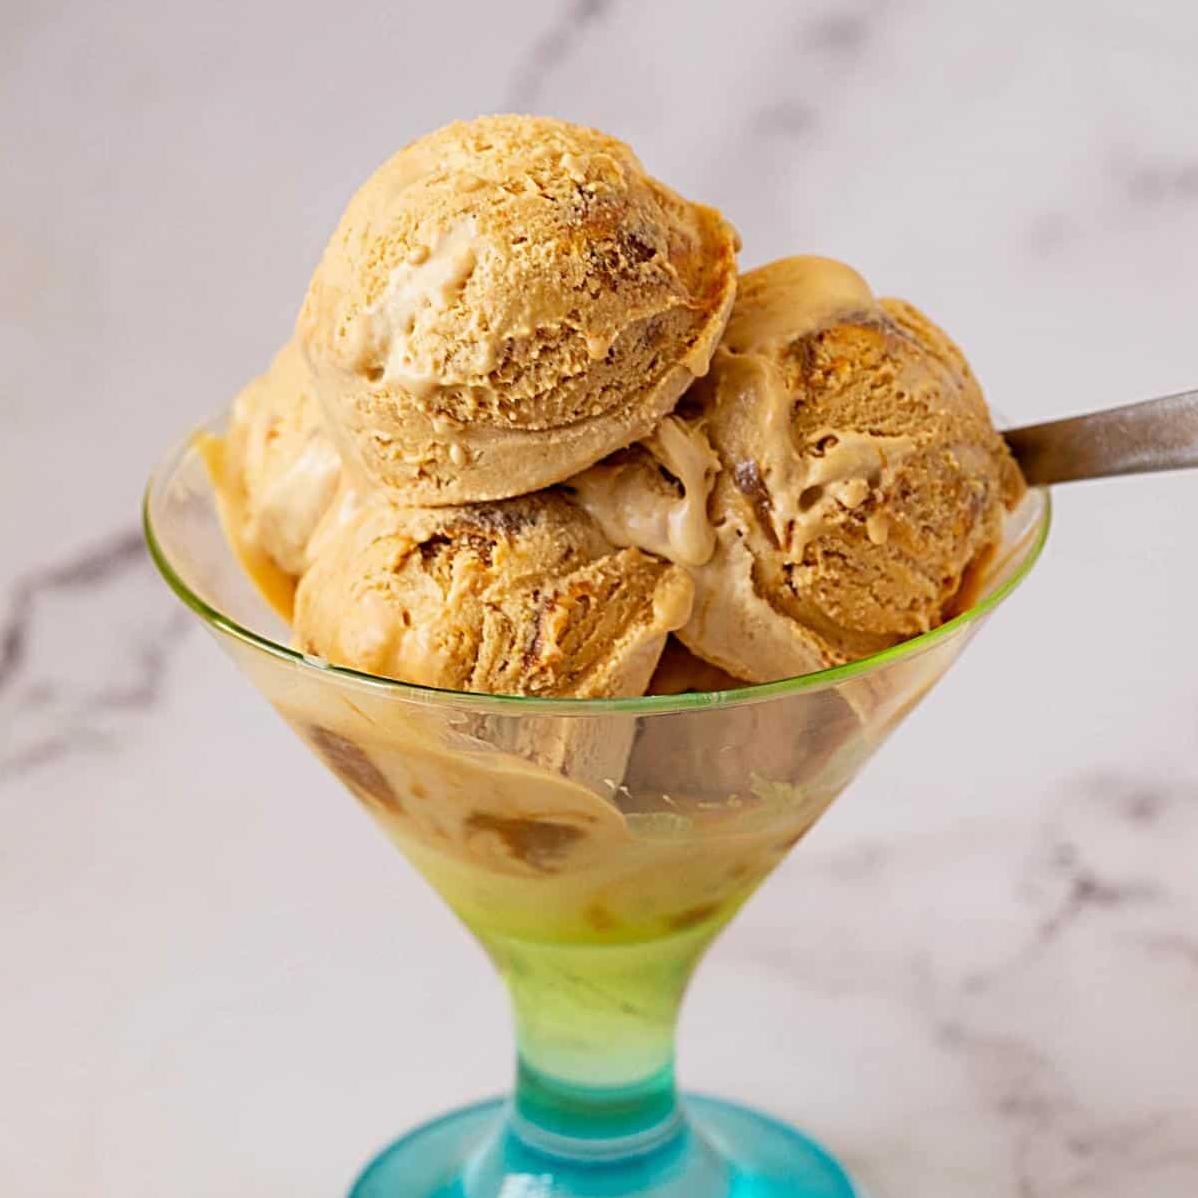  Whether you're enjoying it on its own or as a topping for your favorite dessert, this ice cream is guaranteed to be a hit.